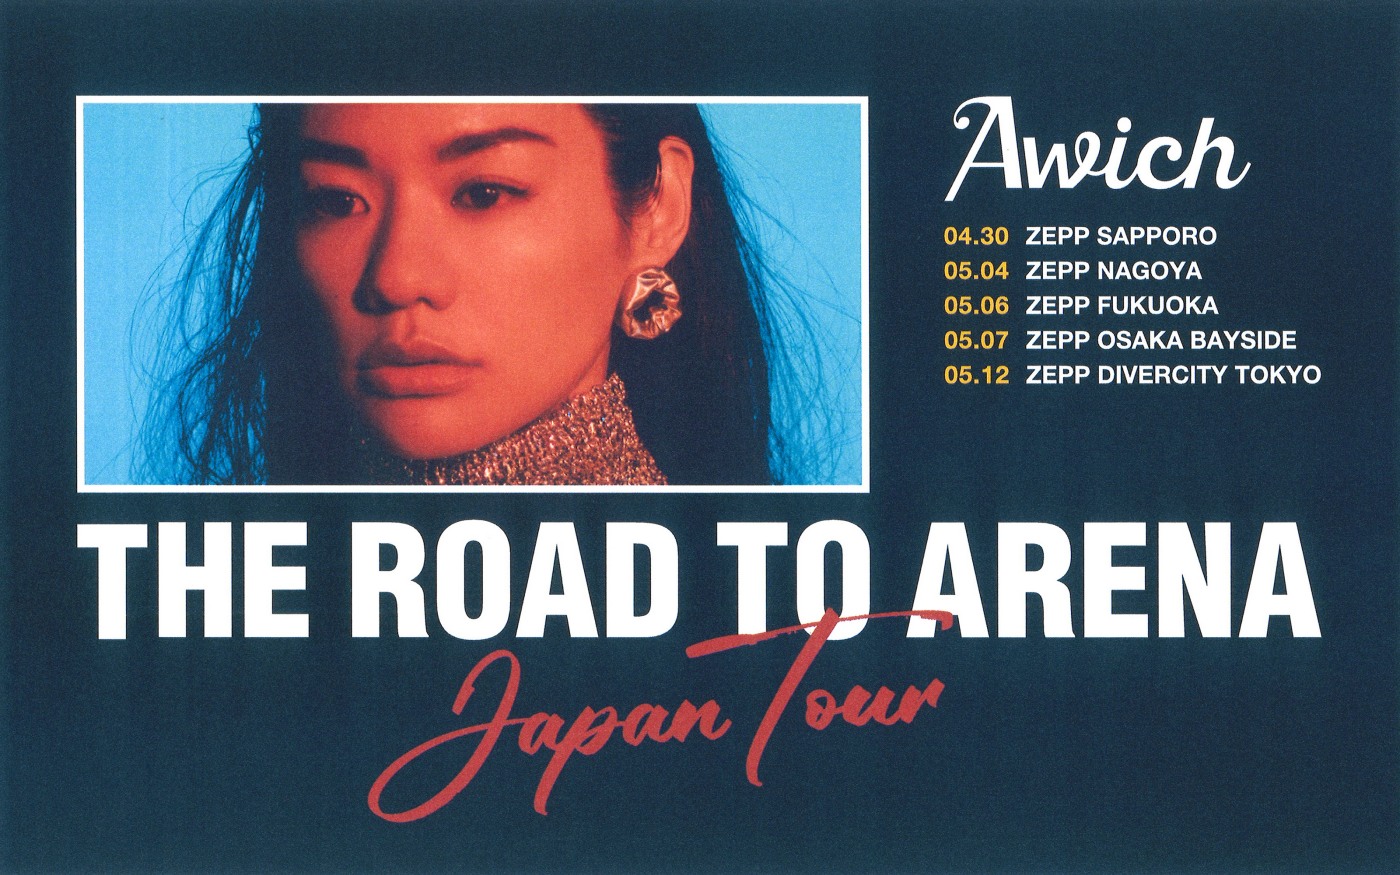 Awichが全国5箇所を廻る「THE ROAD TO ARENA Japan Tour」の開催を発表 